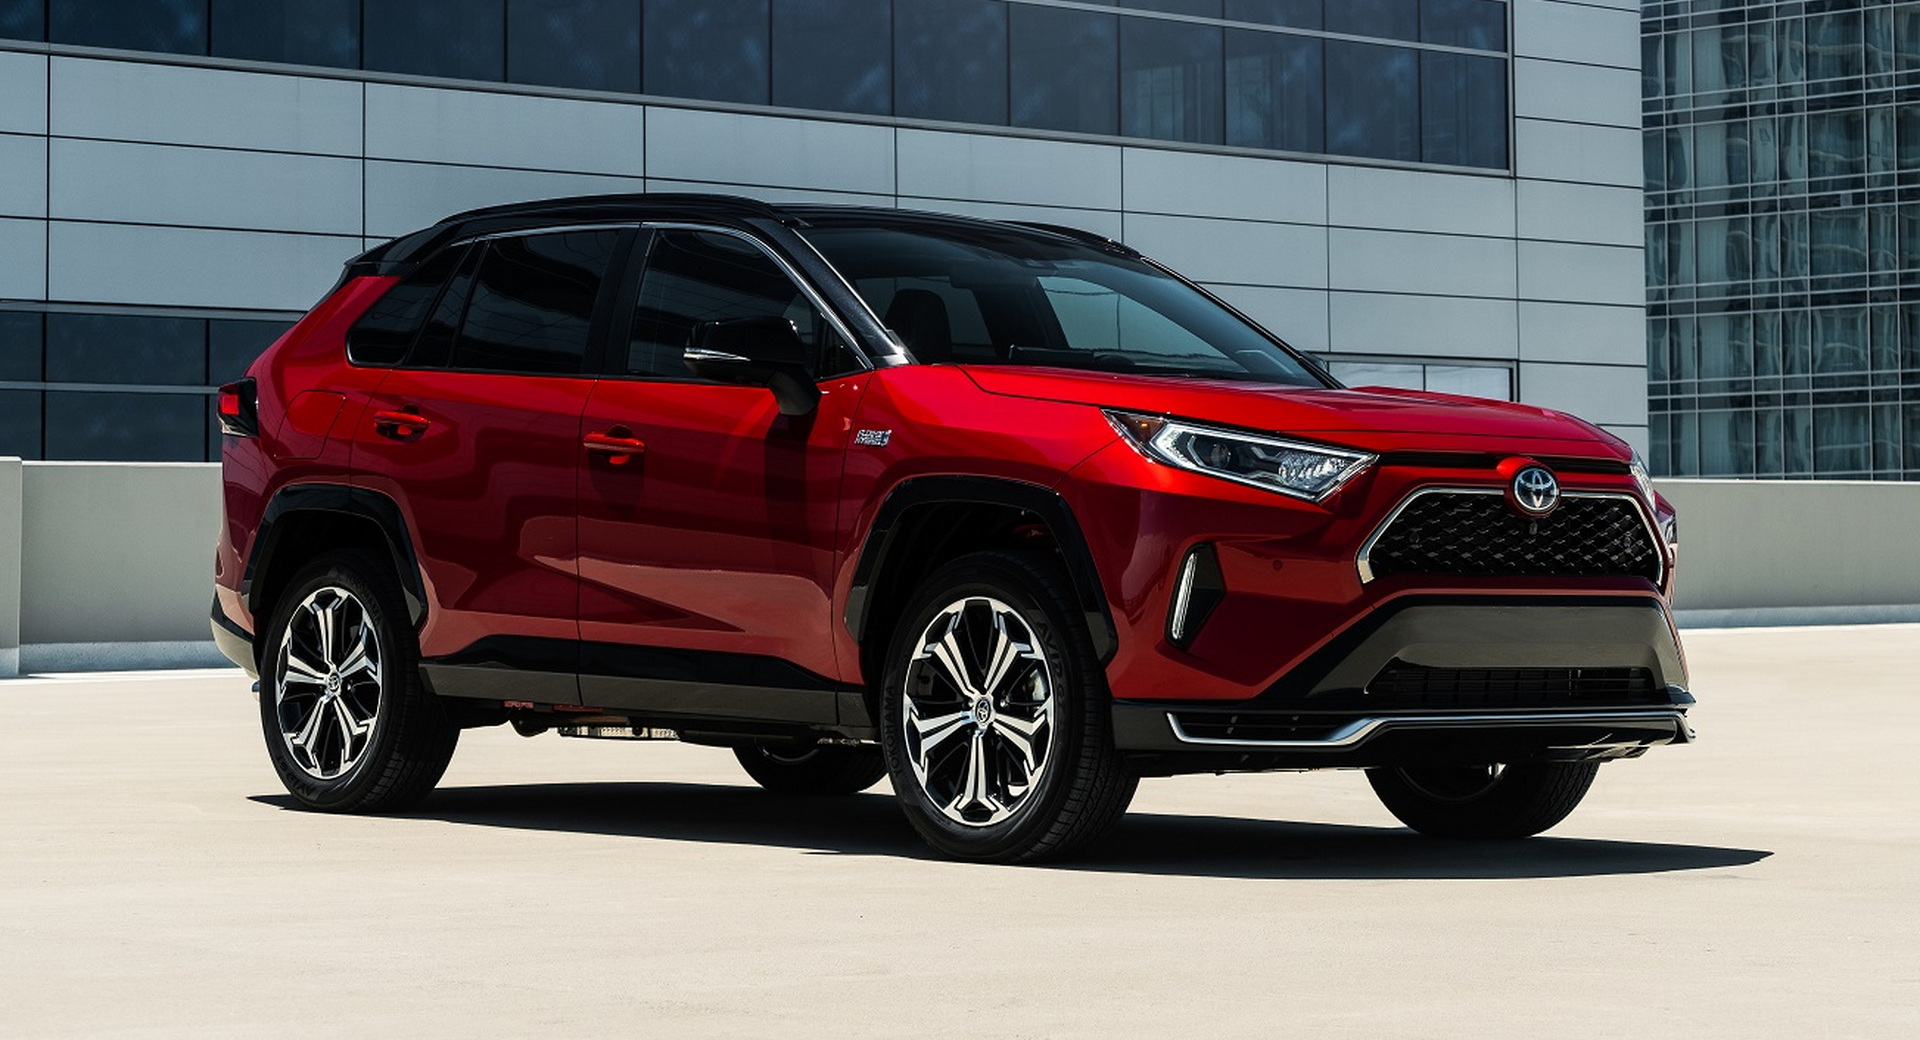 Can The Toyota RAV4 Prime PHEV Keep Up With A Tesla Model Y In Terms Of Total Emissions?